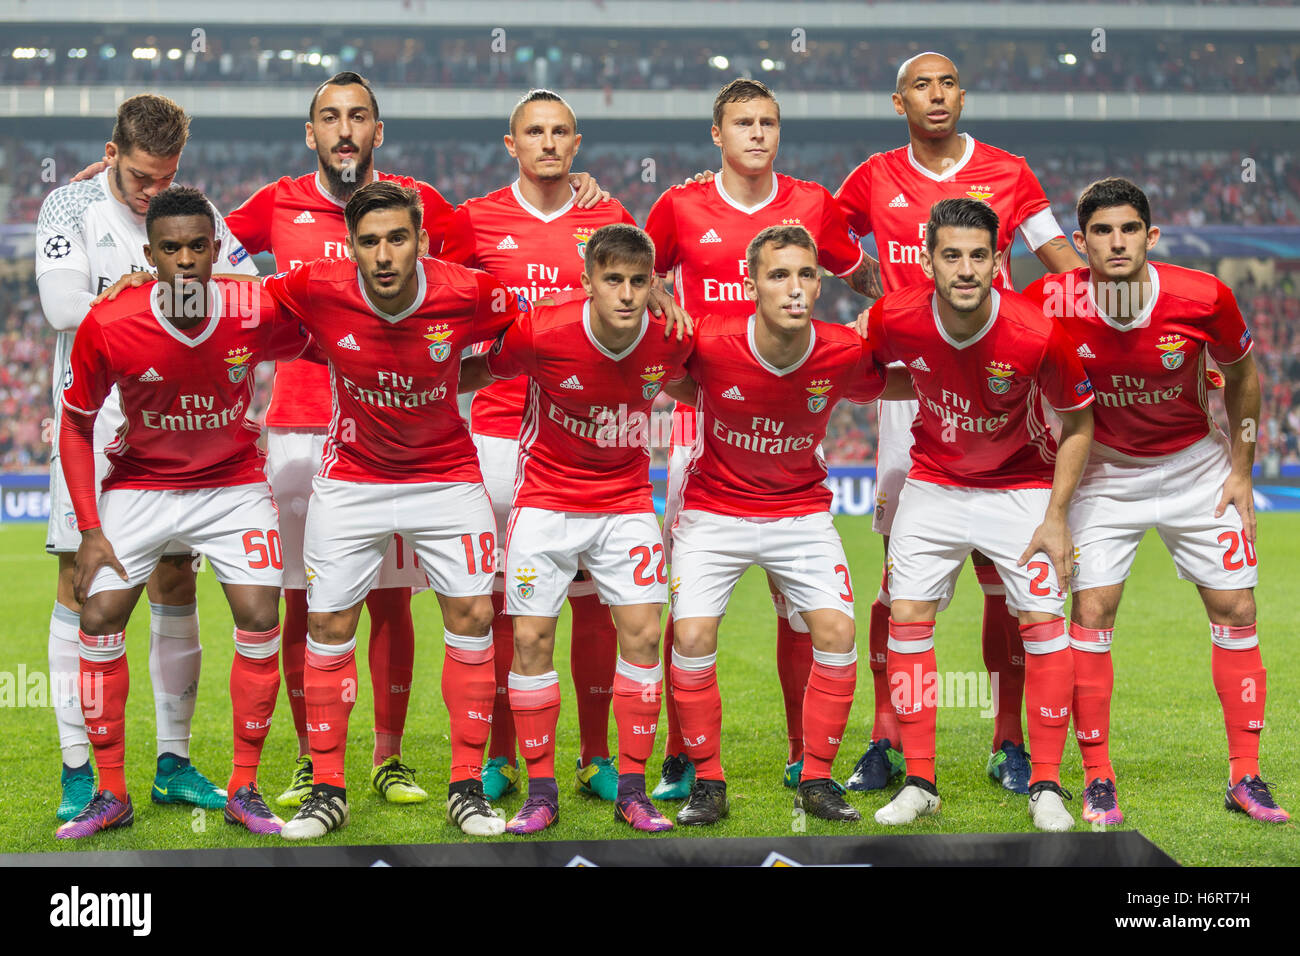 Benfica Fc High Resolution Stock Photography And Images Alamy